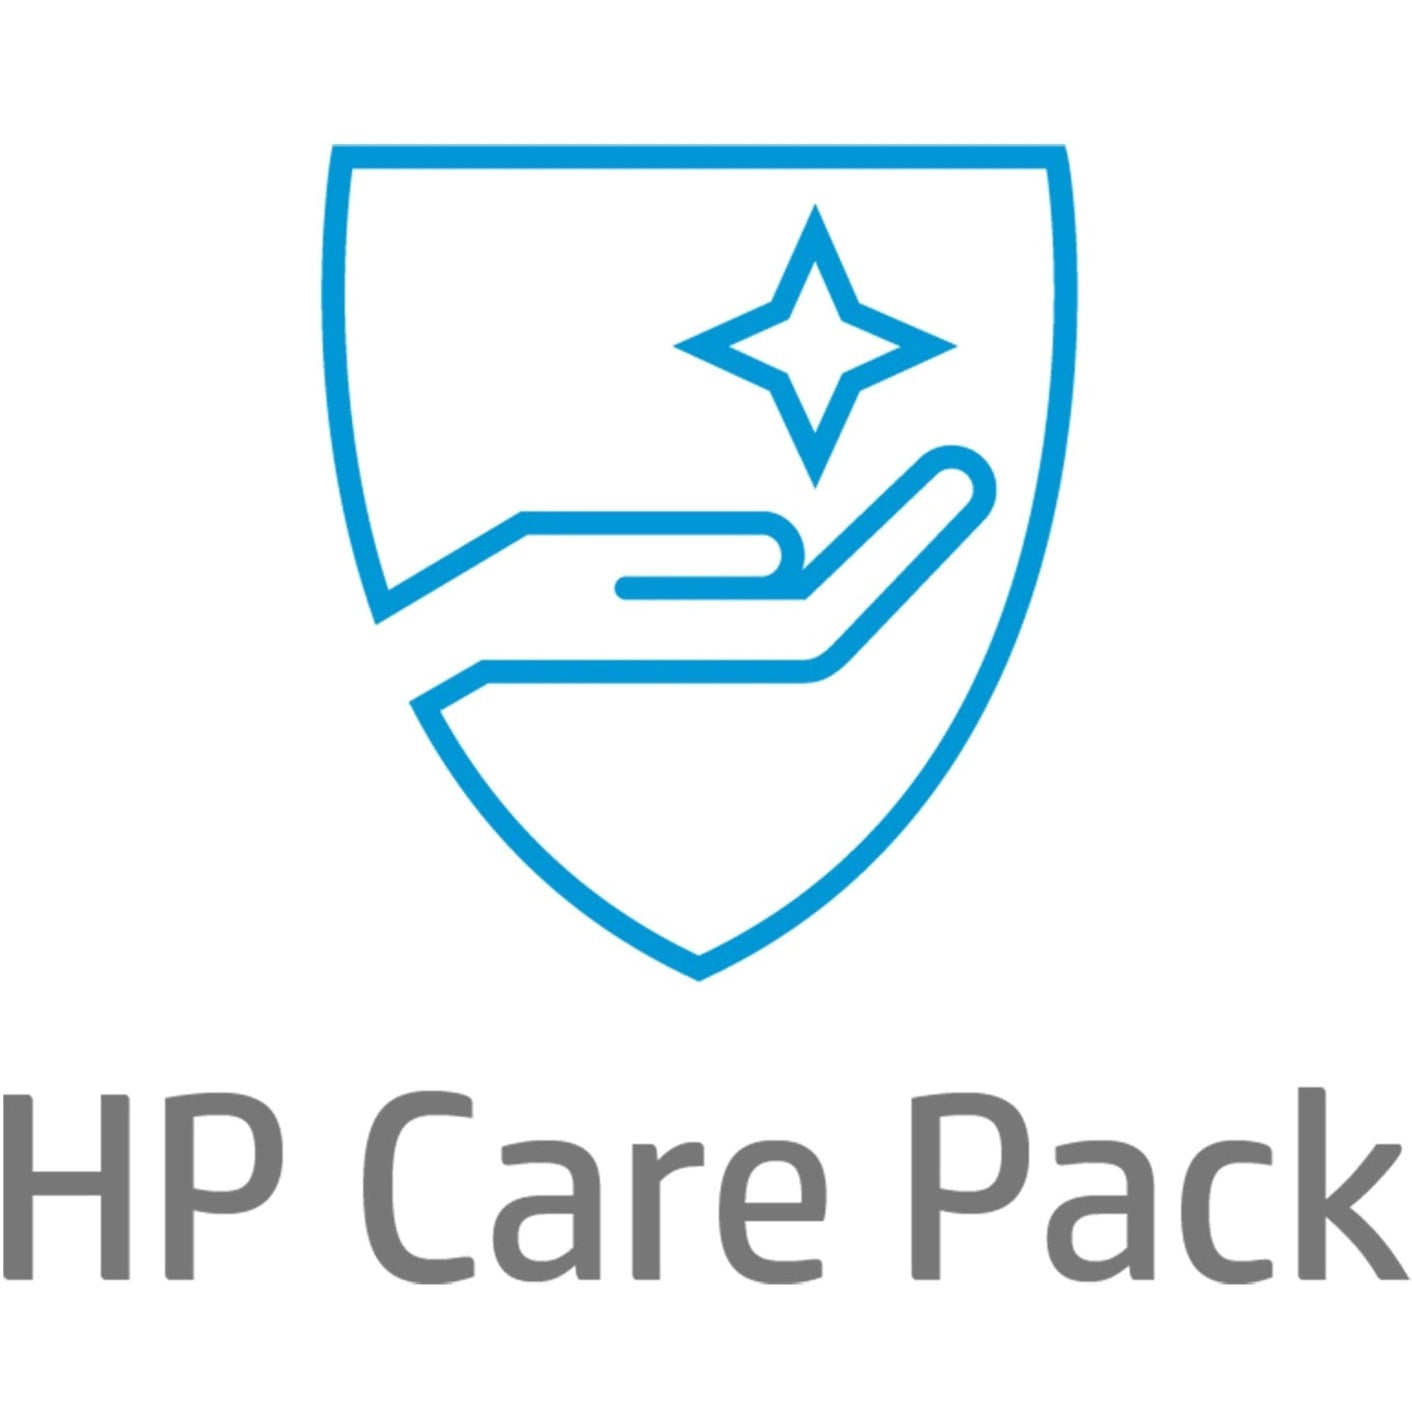 HP Care Pack - Extended Warranty - 3 Year - Warranty (UB0A7E)